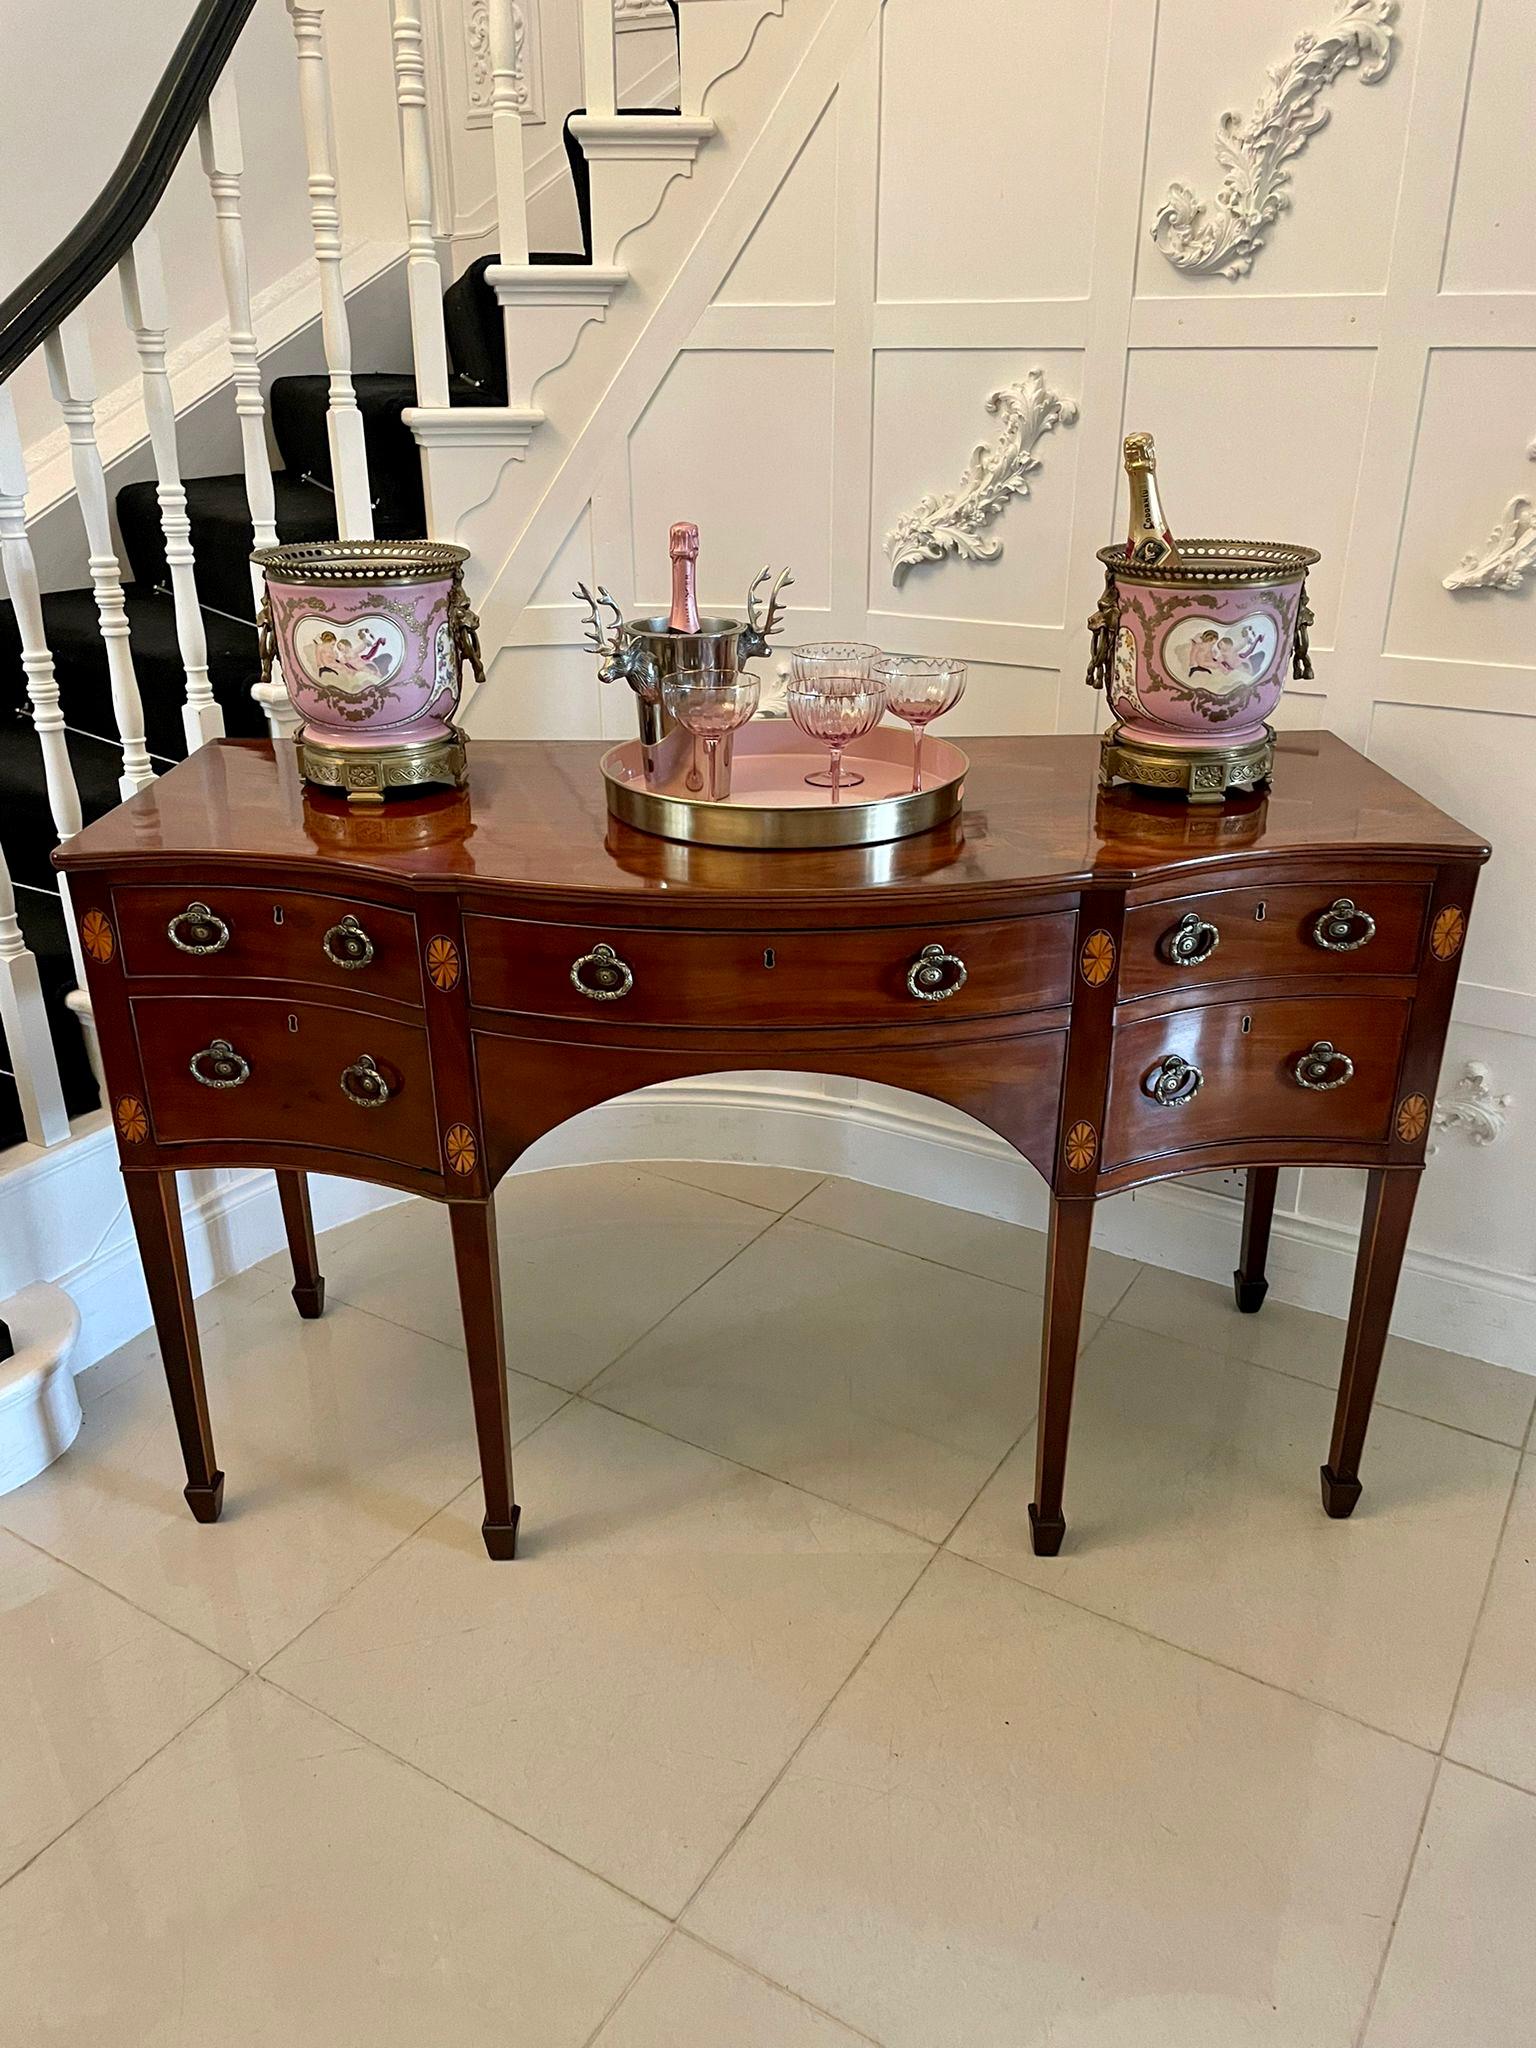 Fine quality antique 18th century George III mahogany inlaid serpentine shape sideboard having a figured mahogany serpentine shaped top above a bow fronted centre drawer flanked by a serpentine shaped cellarette drawer and two oak lined drawers with